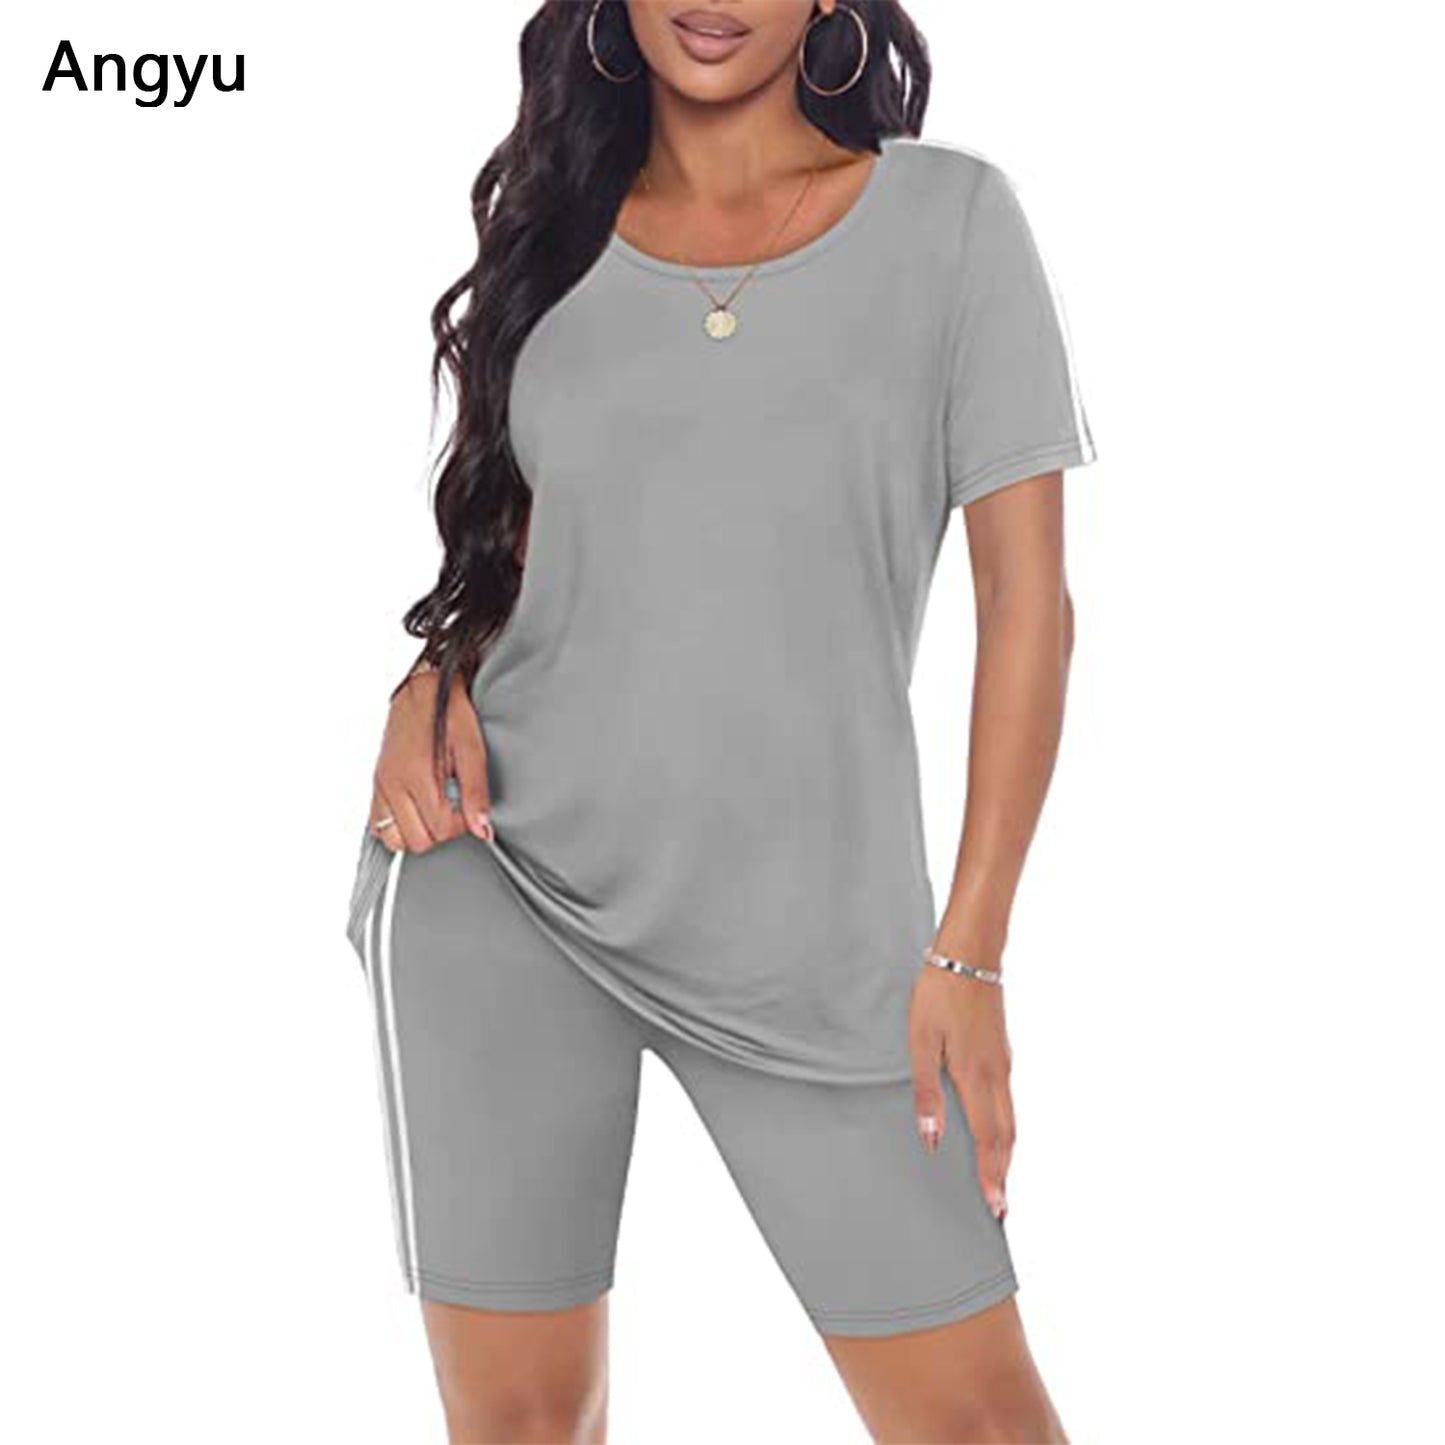 Angyu Two Piece Outfits for Women Short Sleeve